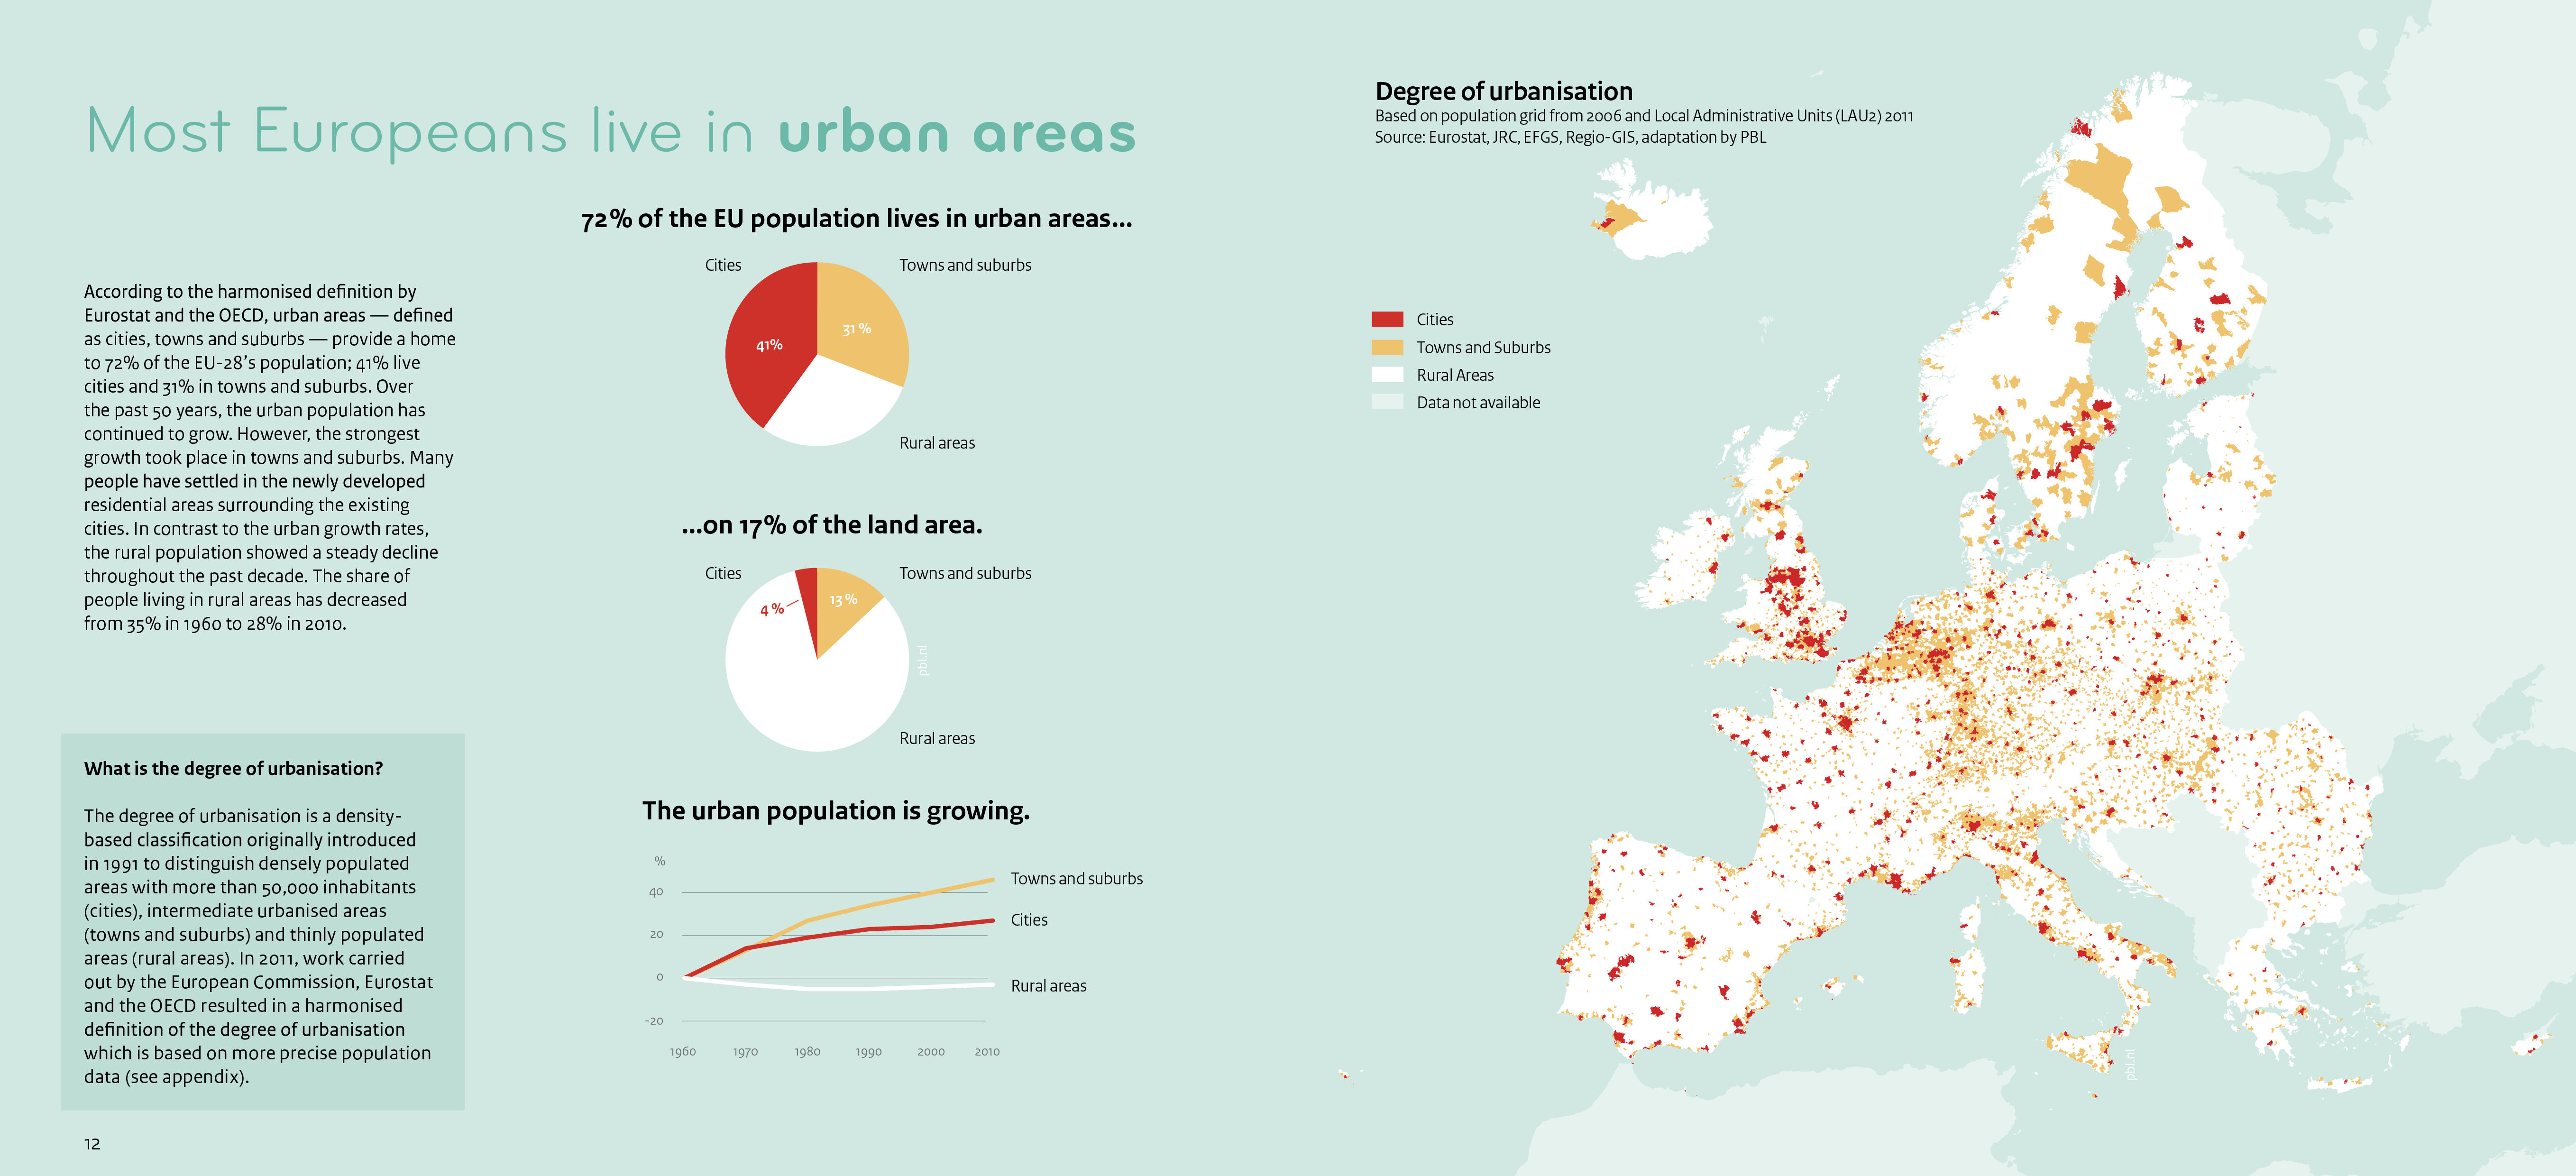 This infographic shows the share of EU population living in ‘cities’, ‘towns and suburbs’ and ‘rural areas’.